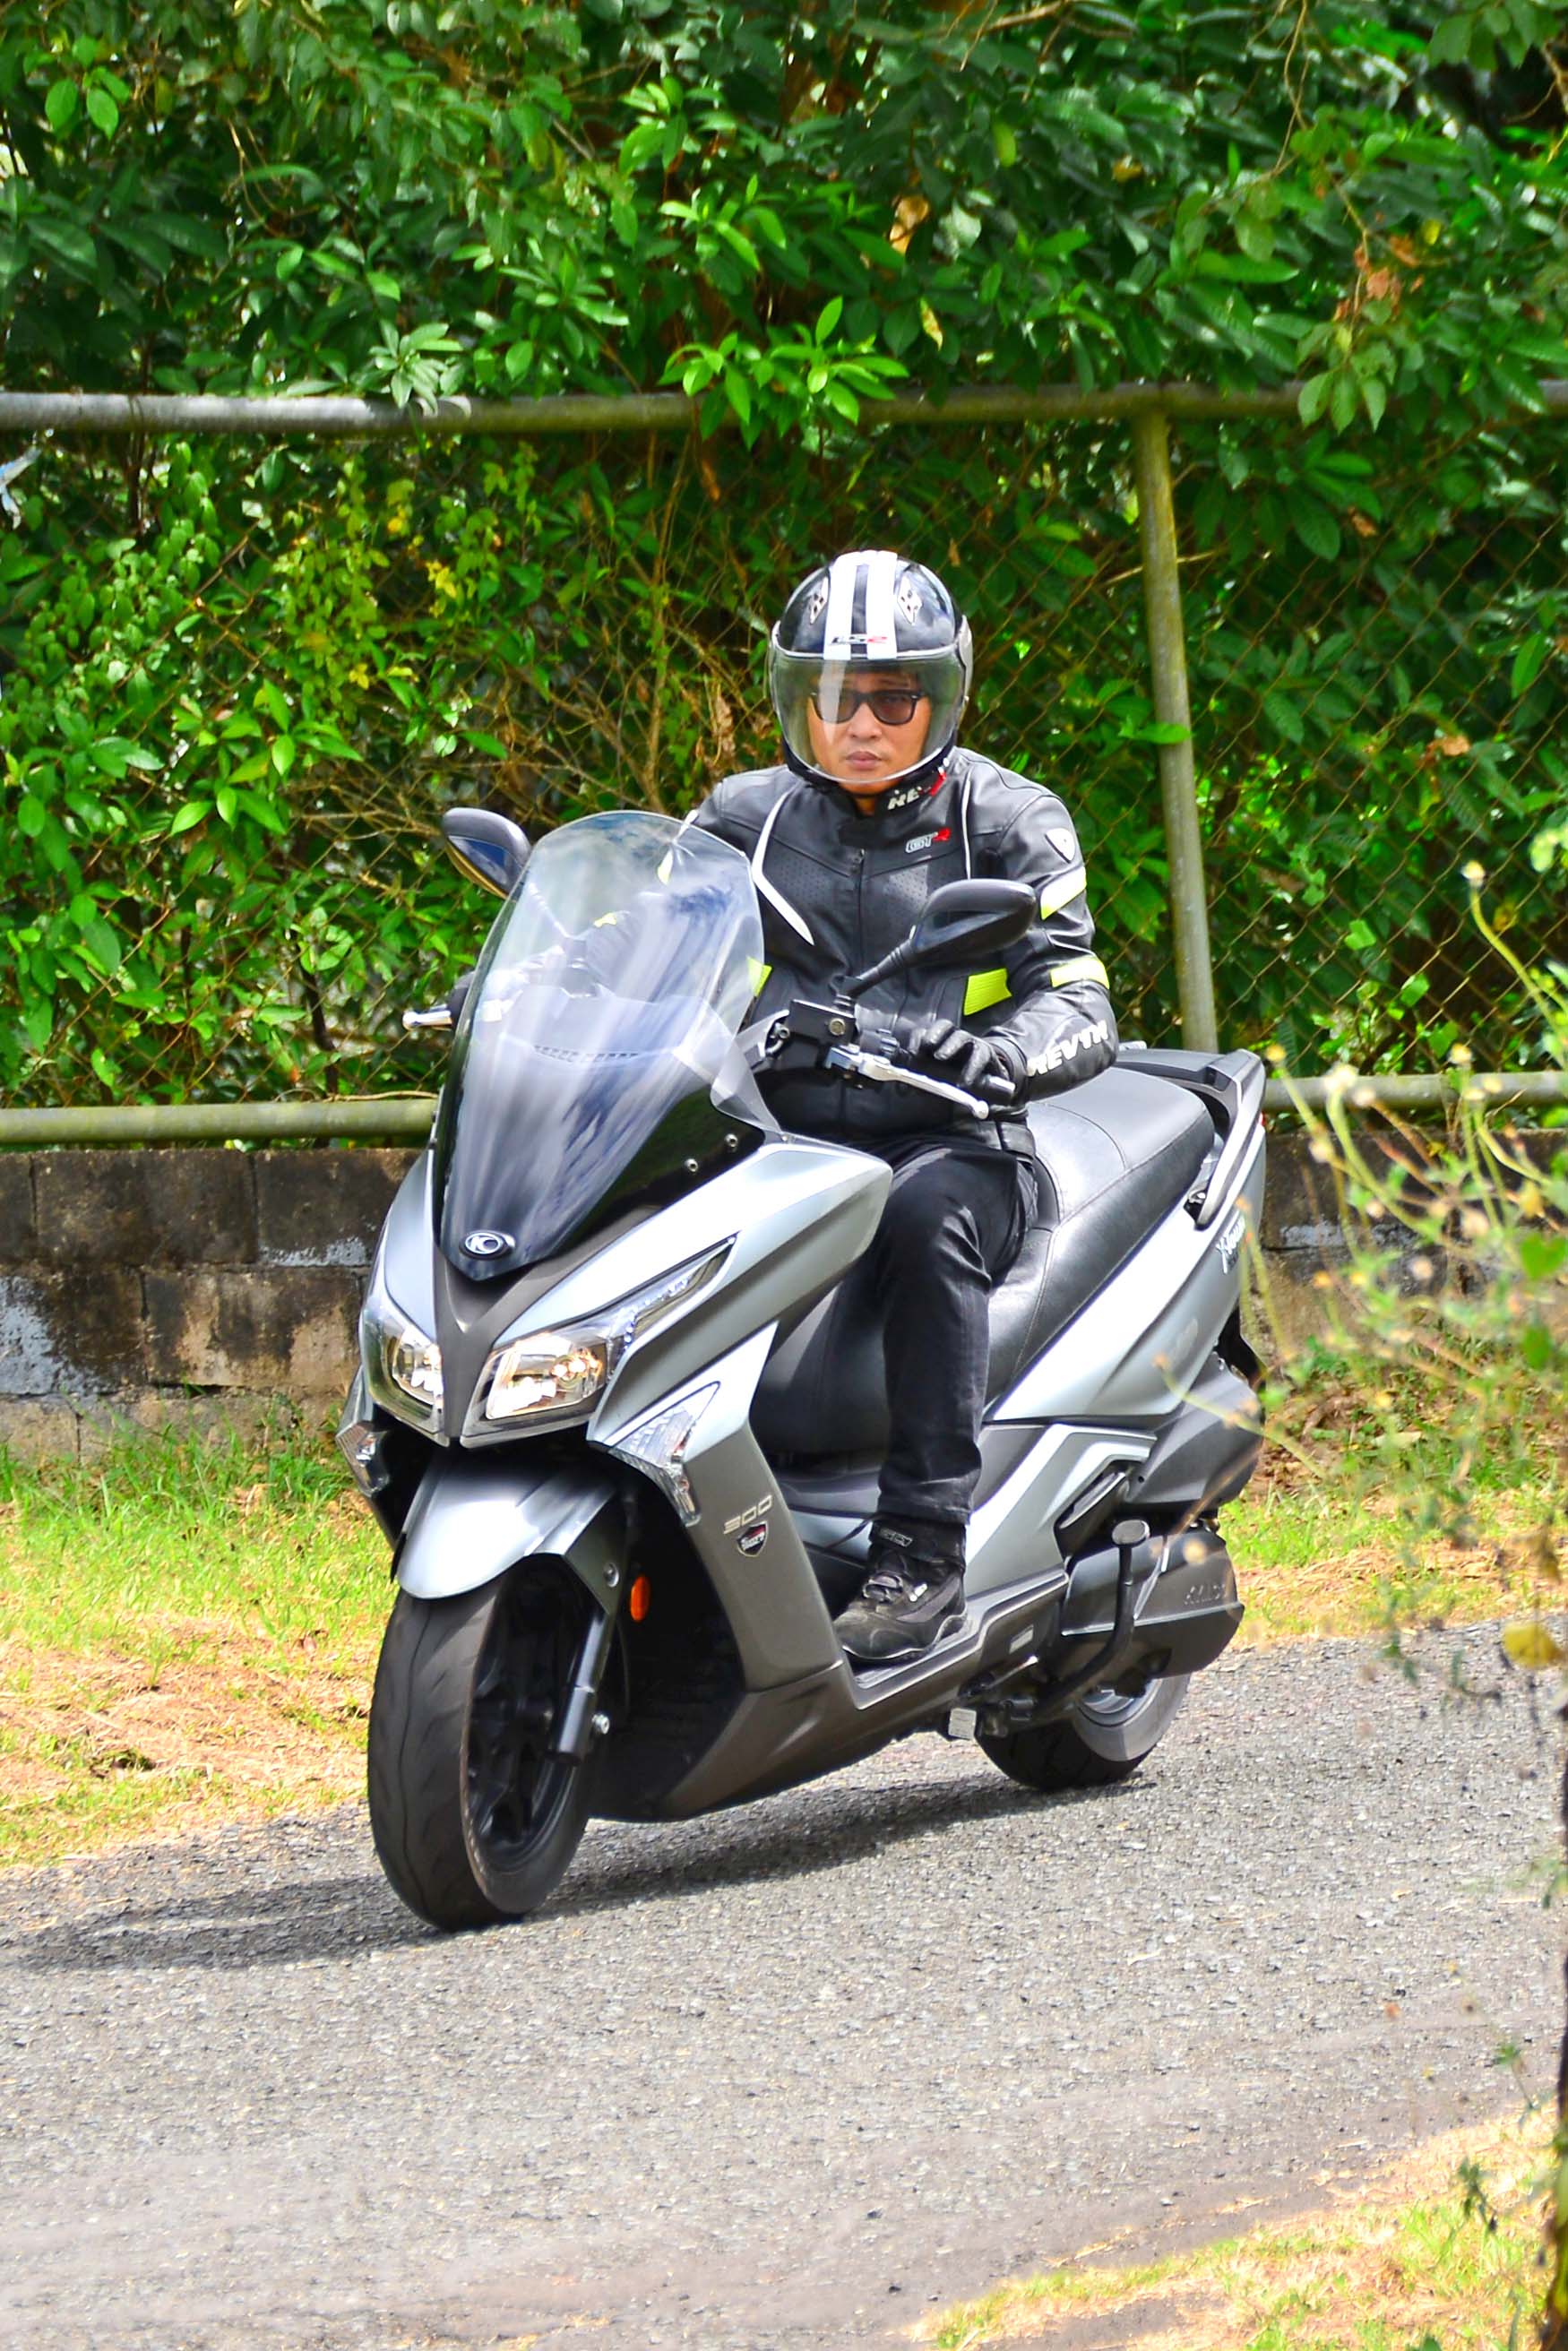 X top 300i speed town kymco Compare 22